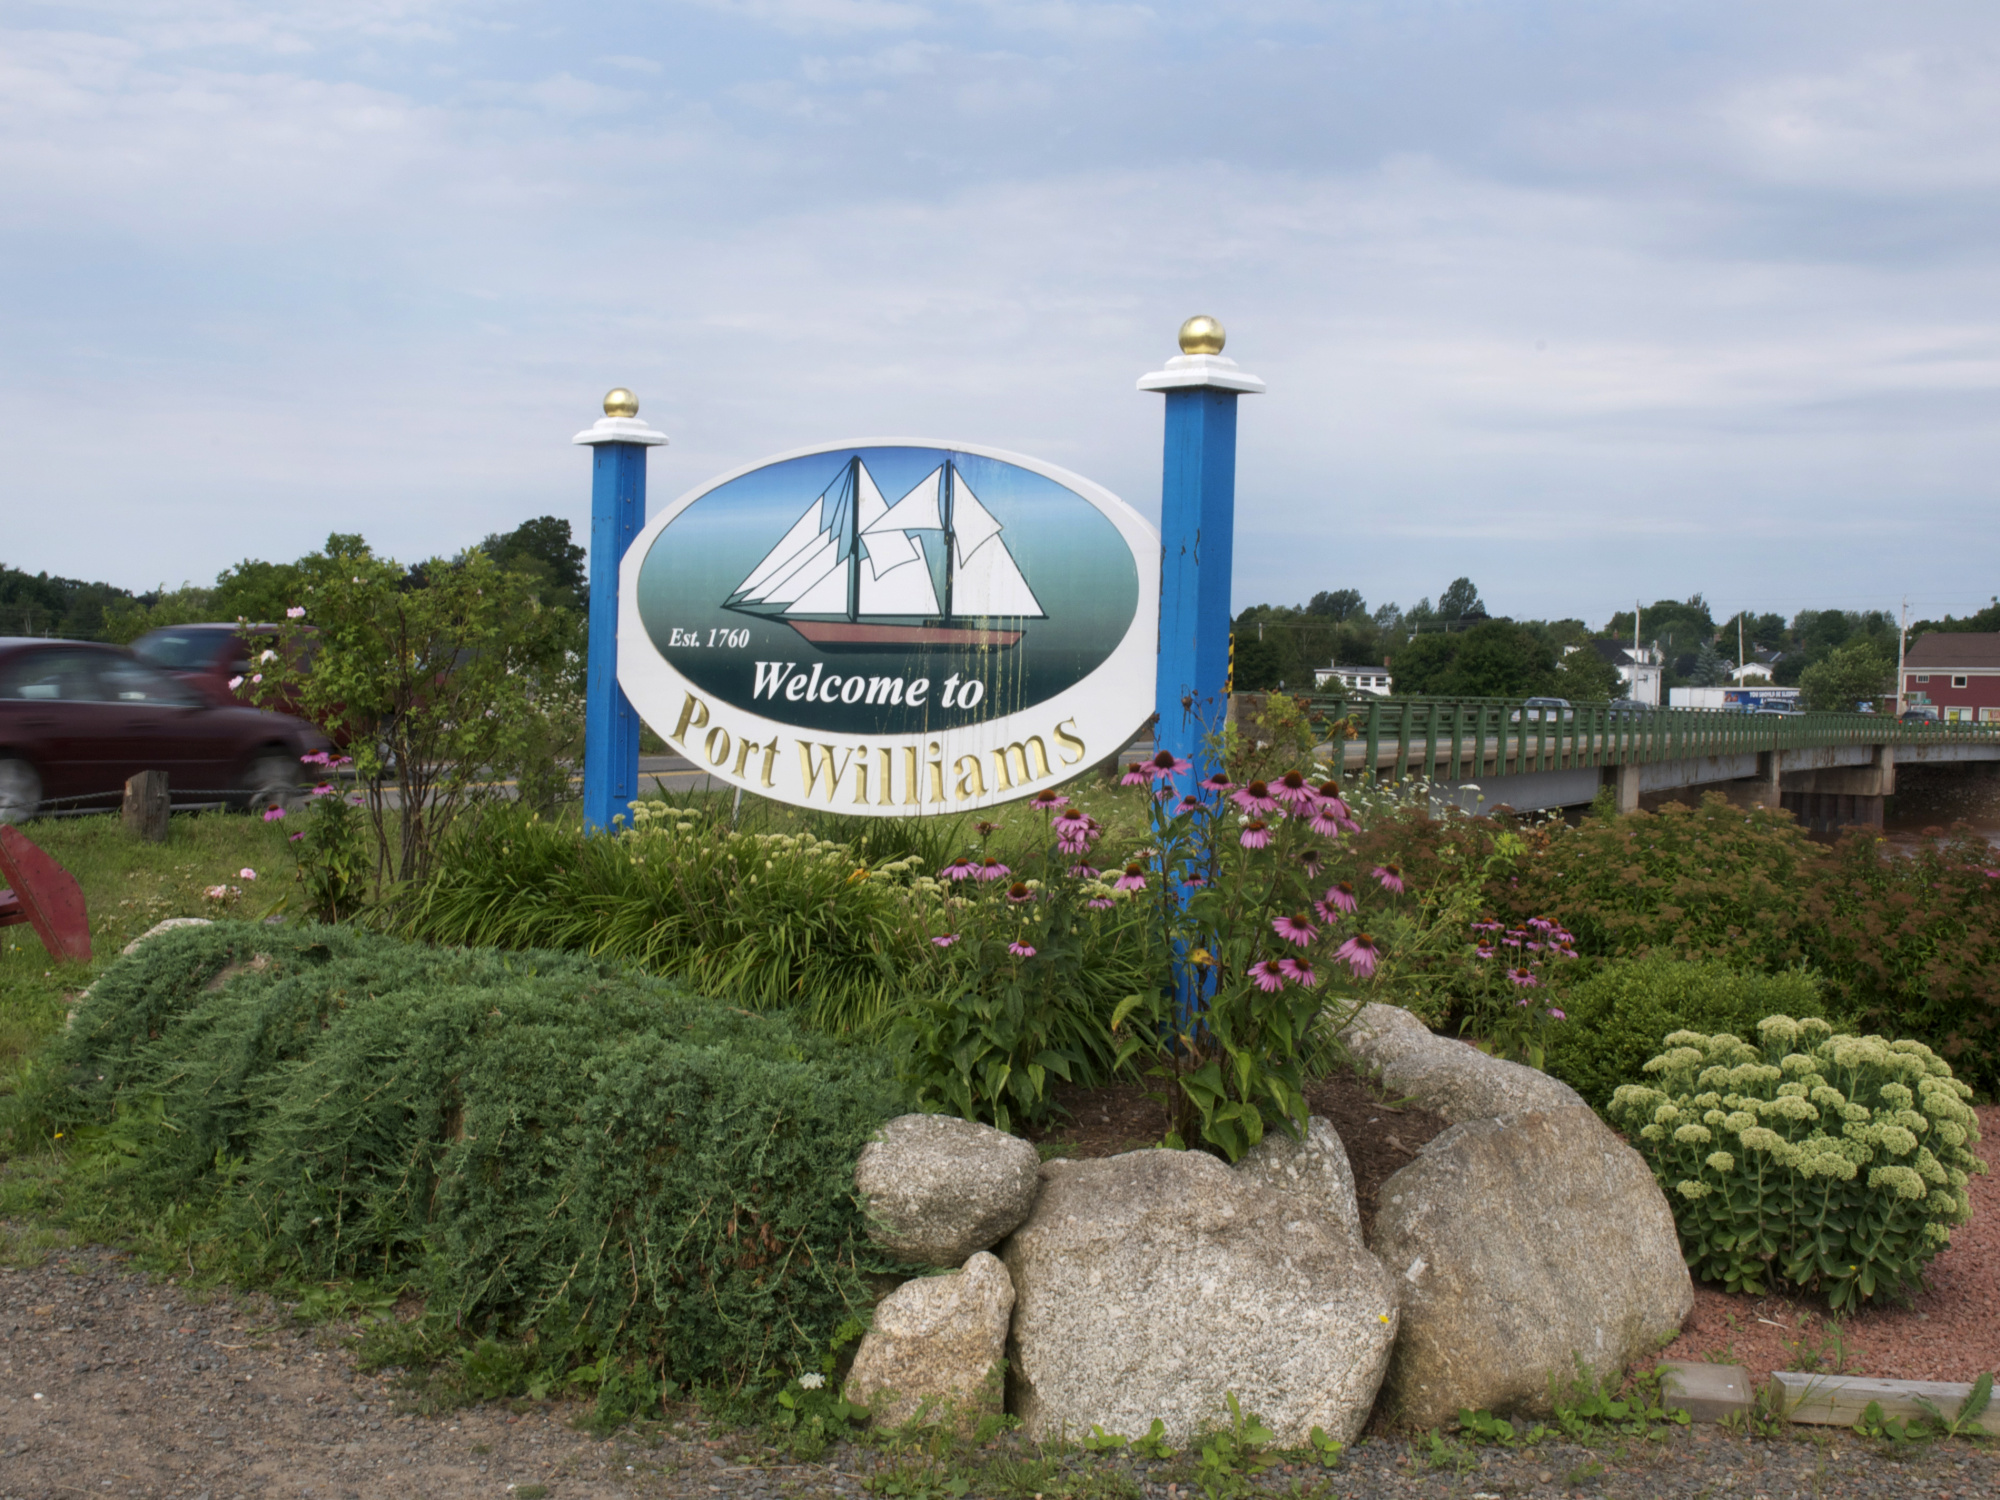 A welcome sign greets visitors to Port Williams, Kings County